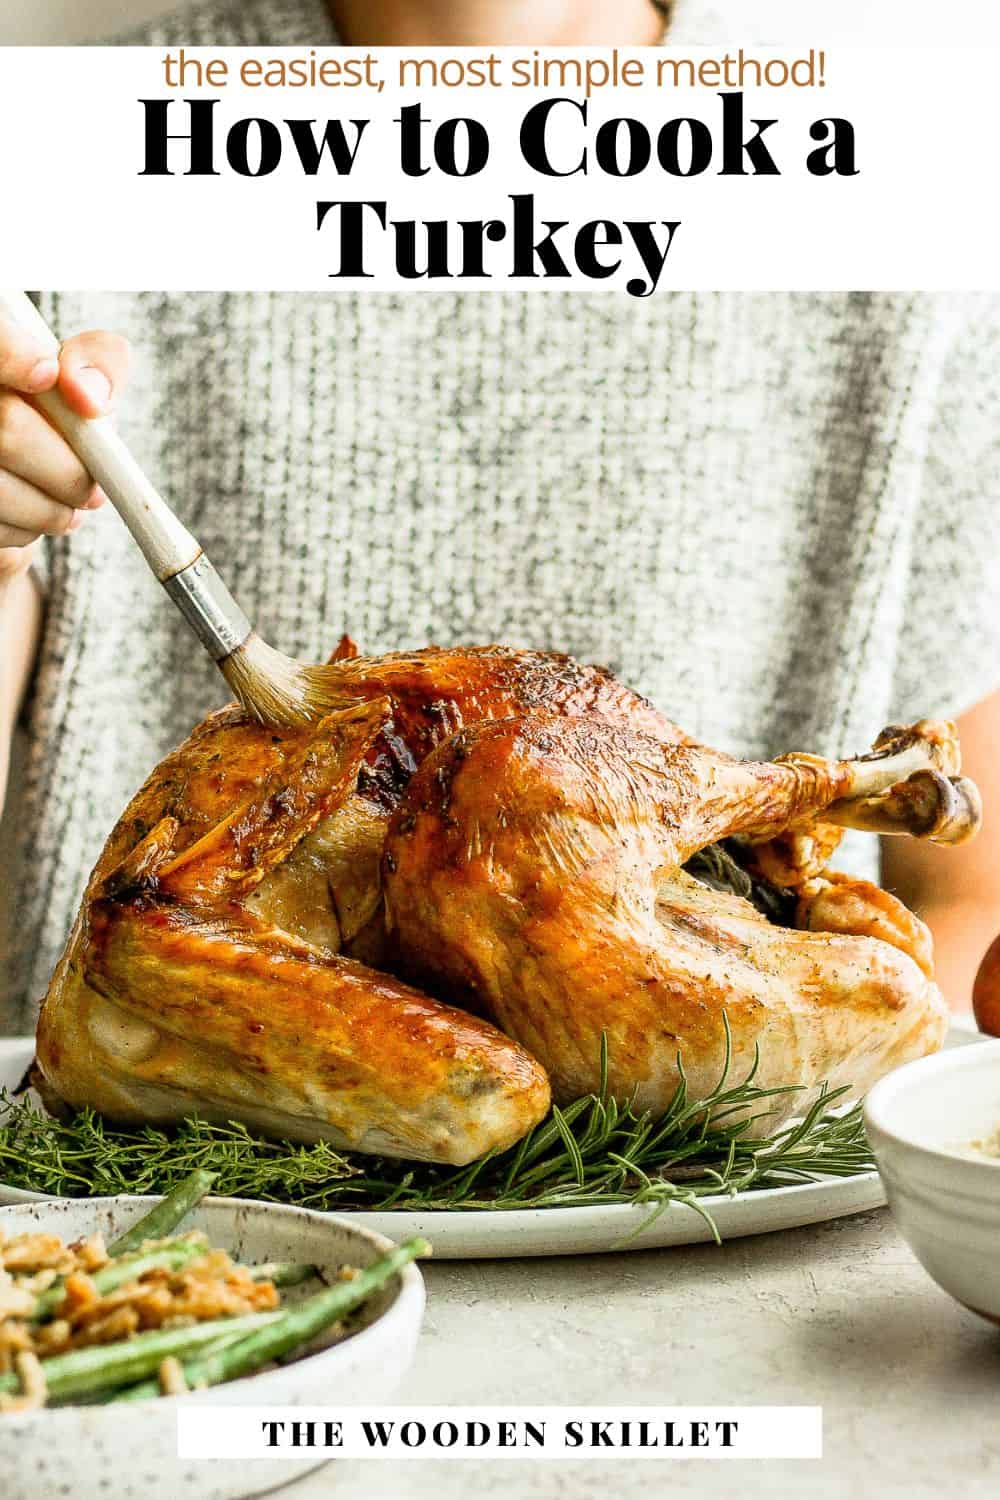 Pinterest image for how to cook a turkey.